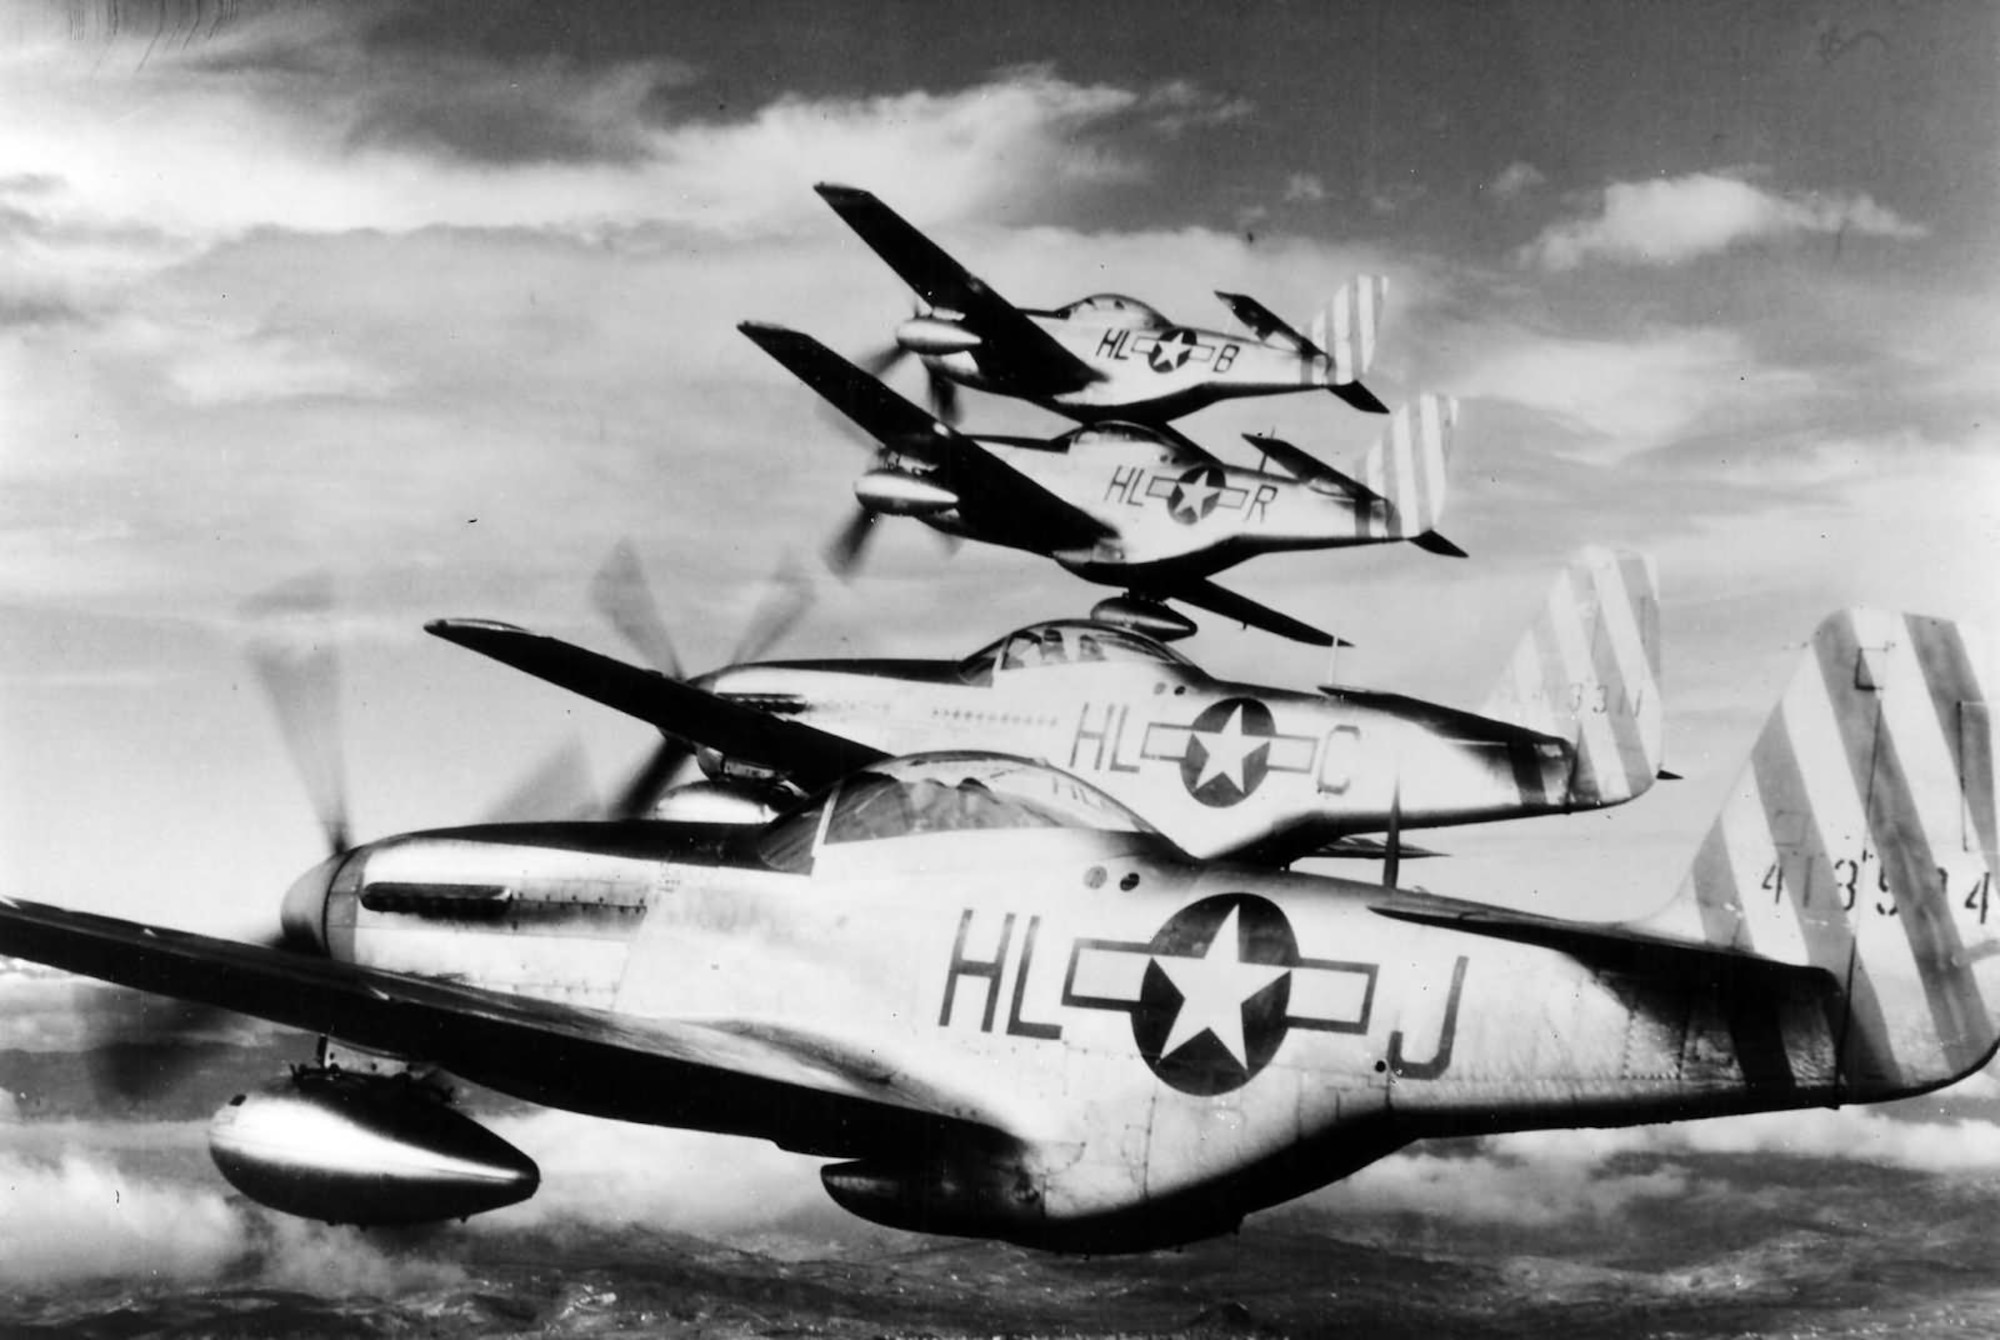 The sleek, highly maneuverable P-51 proved ideal for long range escort missions and an equal match to the Luftwaffe’s fighters. Pilots who flew it praised its maneuverability and visibility during close order engagements with enemy fighters. (Department of Defense photo)